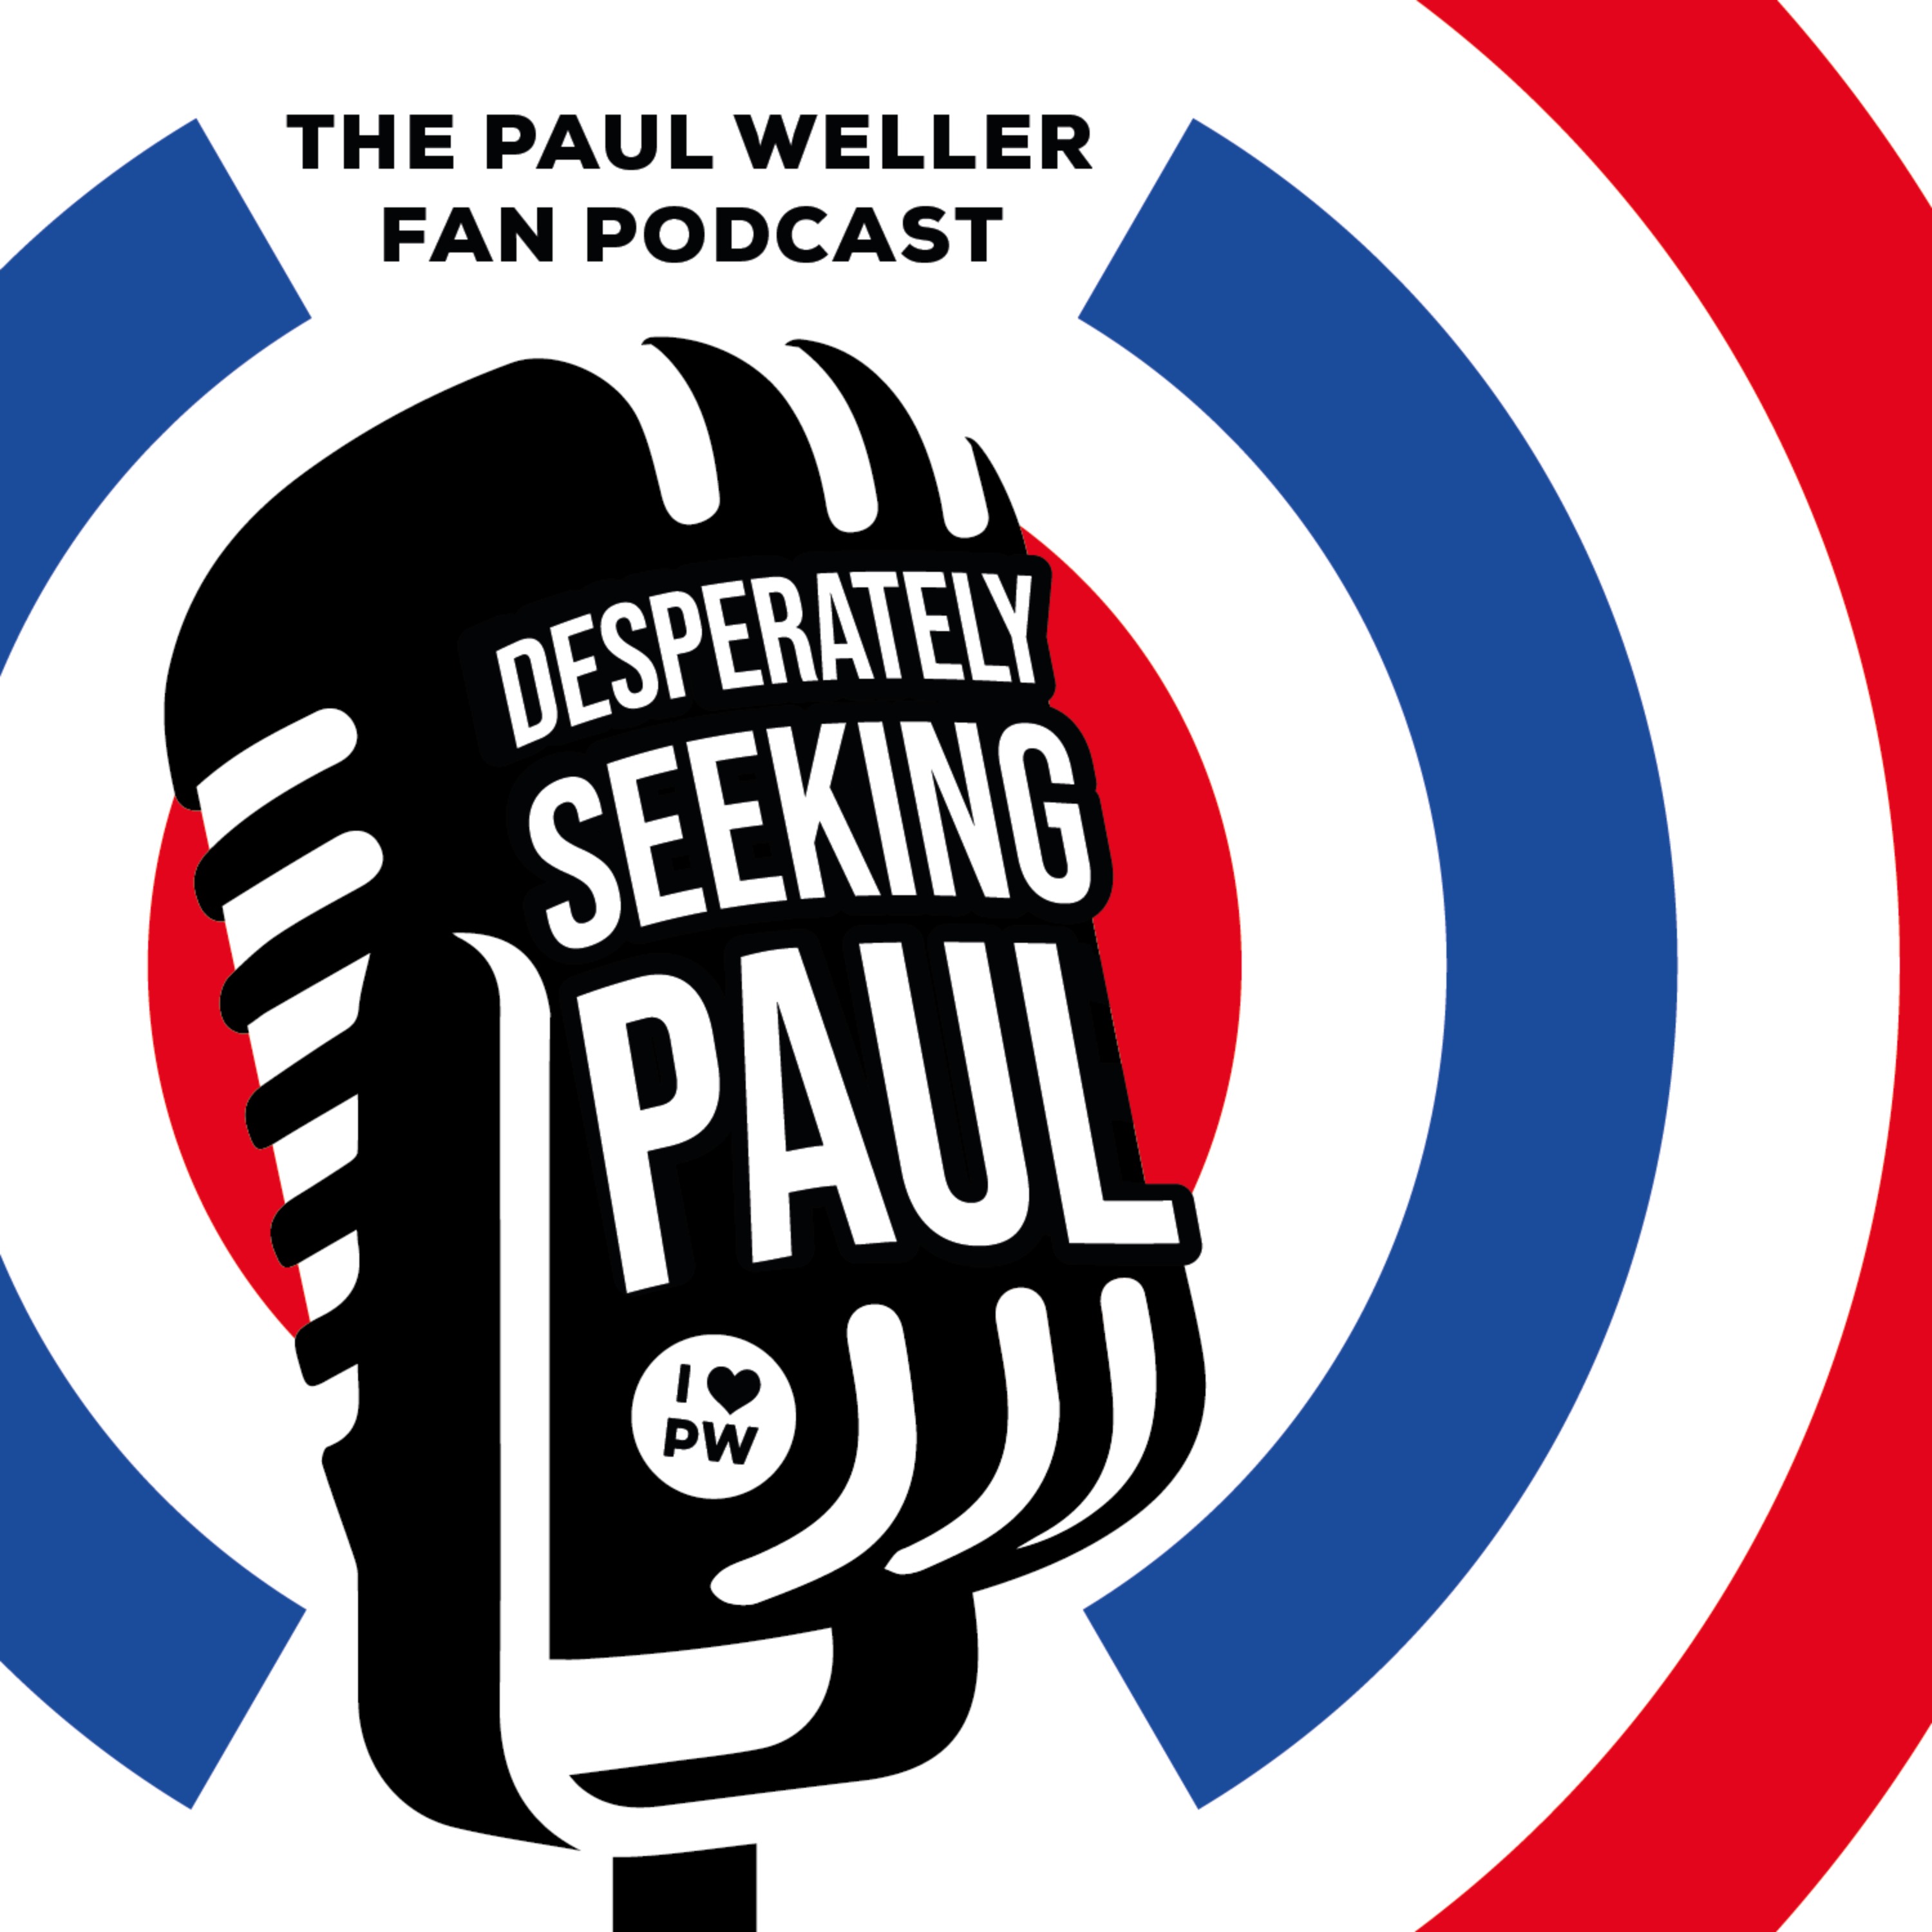 EP148 - Peter Anderson - Photographer, The Style Council, The Jam, Paul Weller